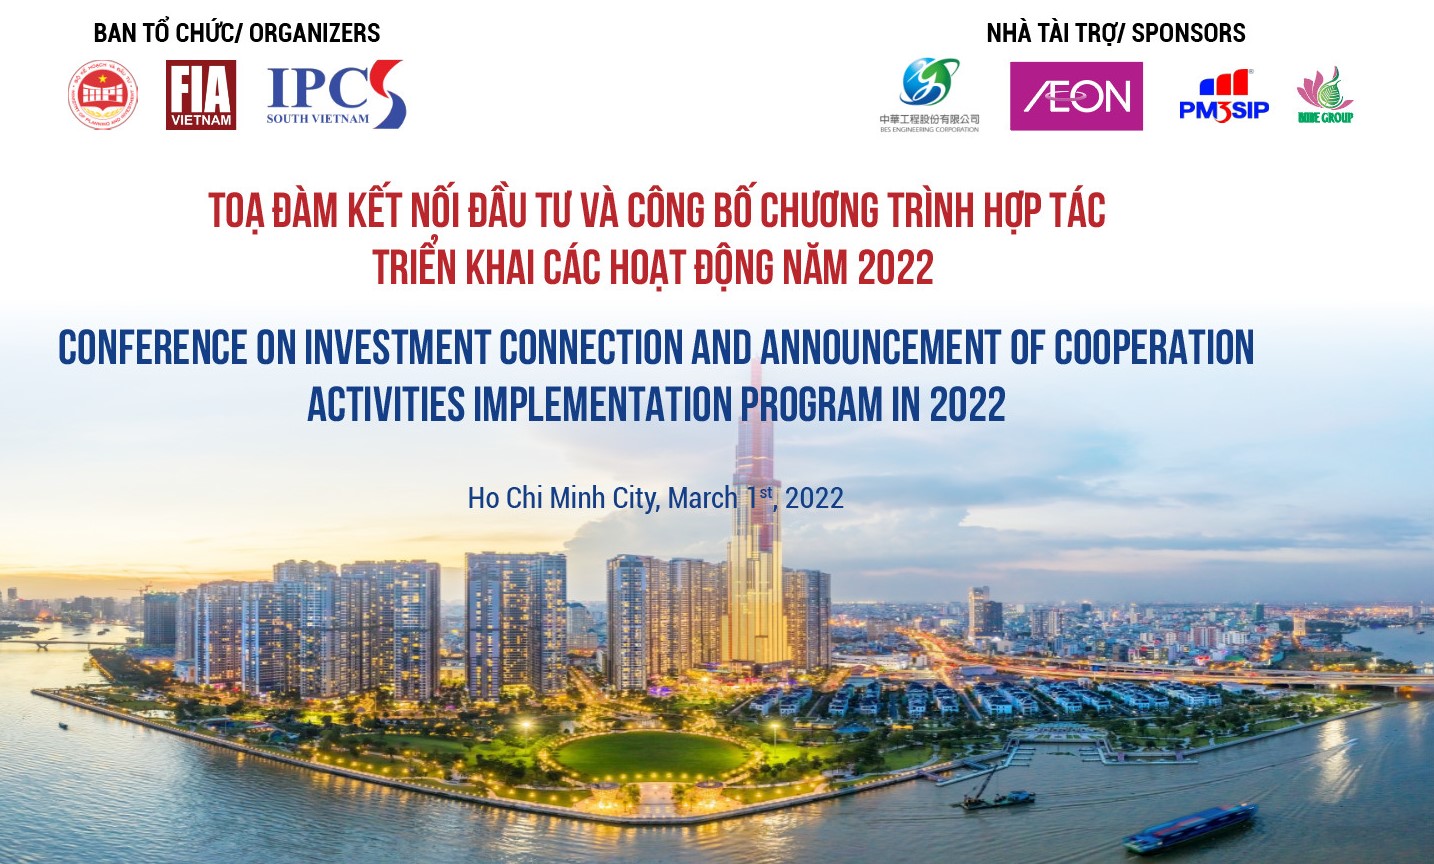 Conference on investment connection and annoucement of Corporation Activities Implementation Program in 2022